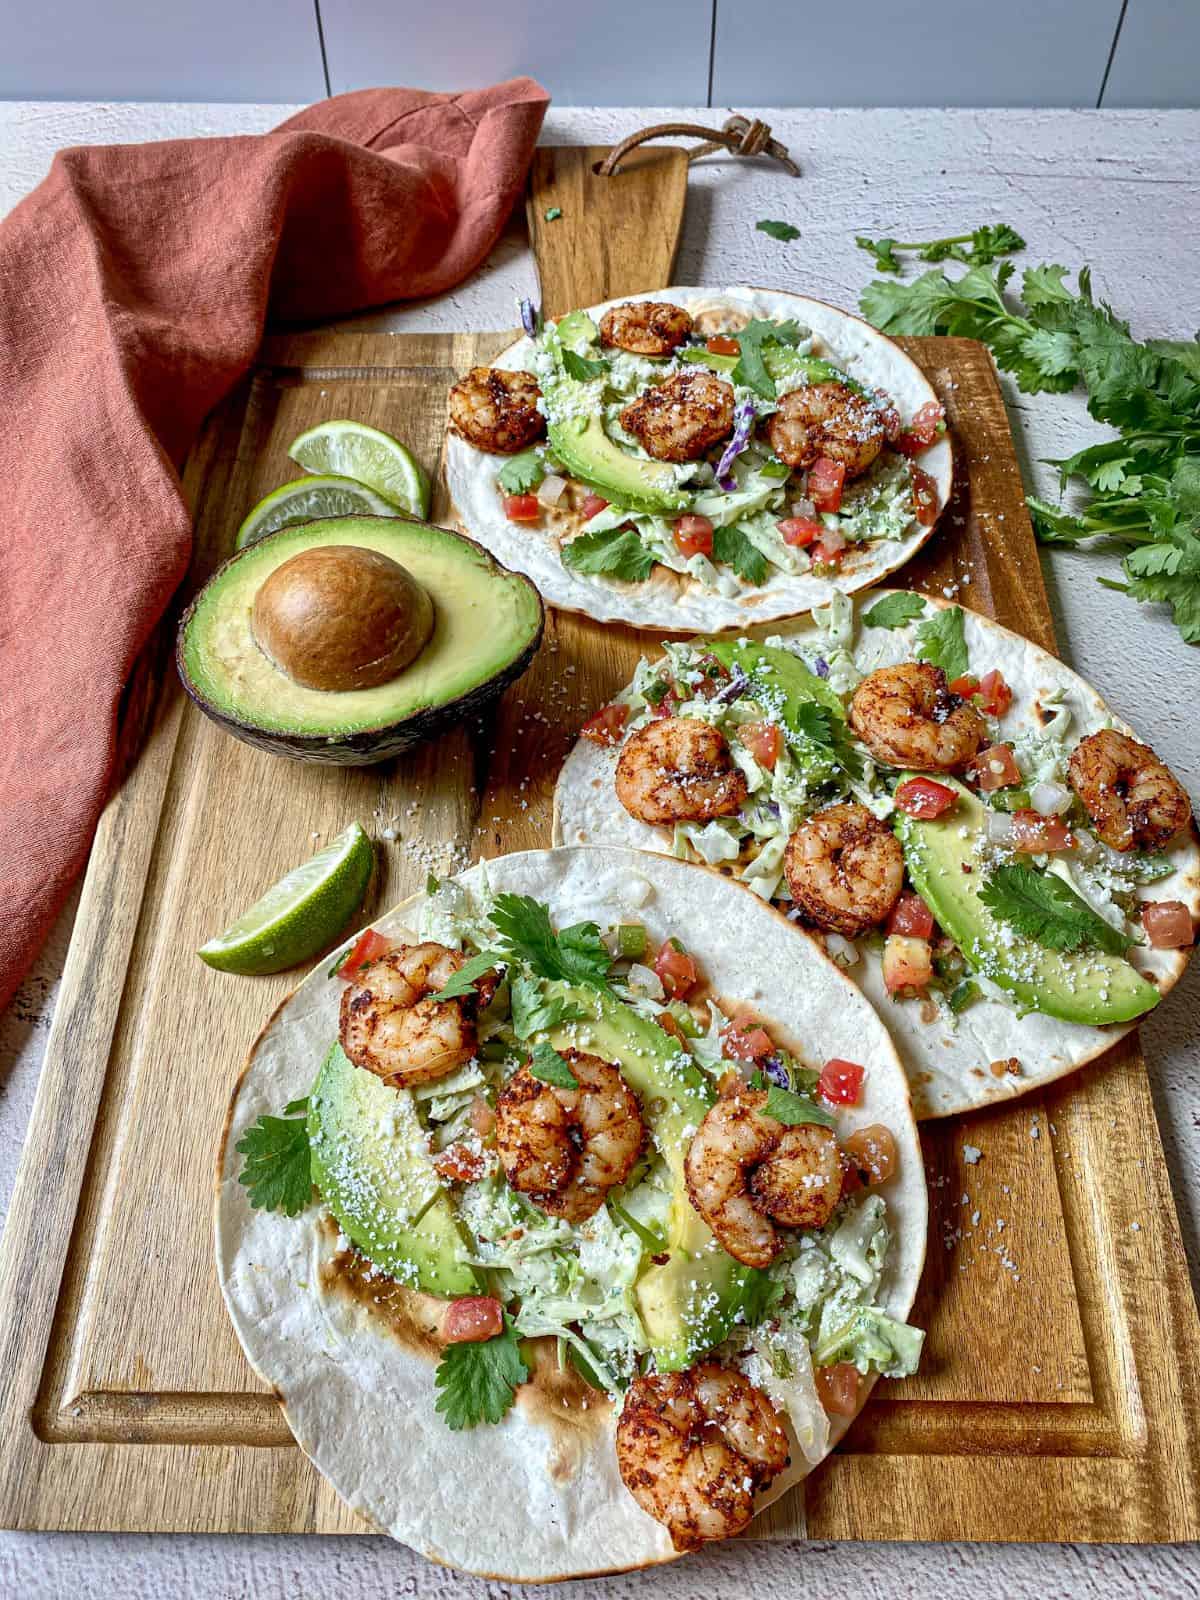 Shrimp tacos with many toppings on flour tortillas.